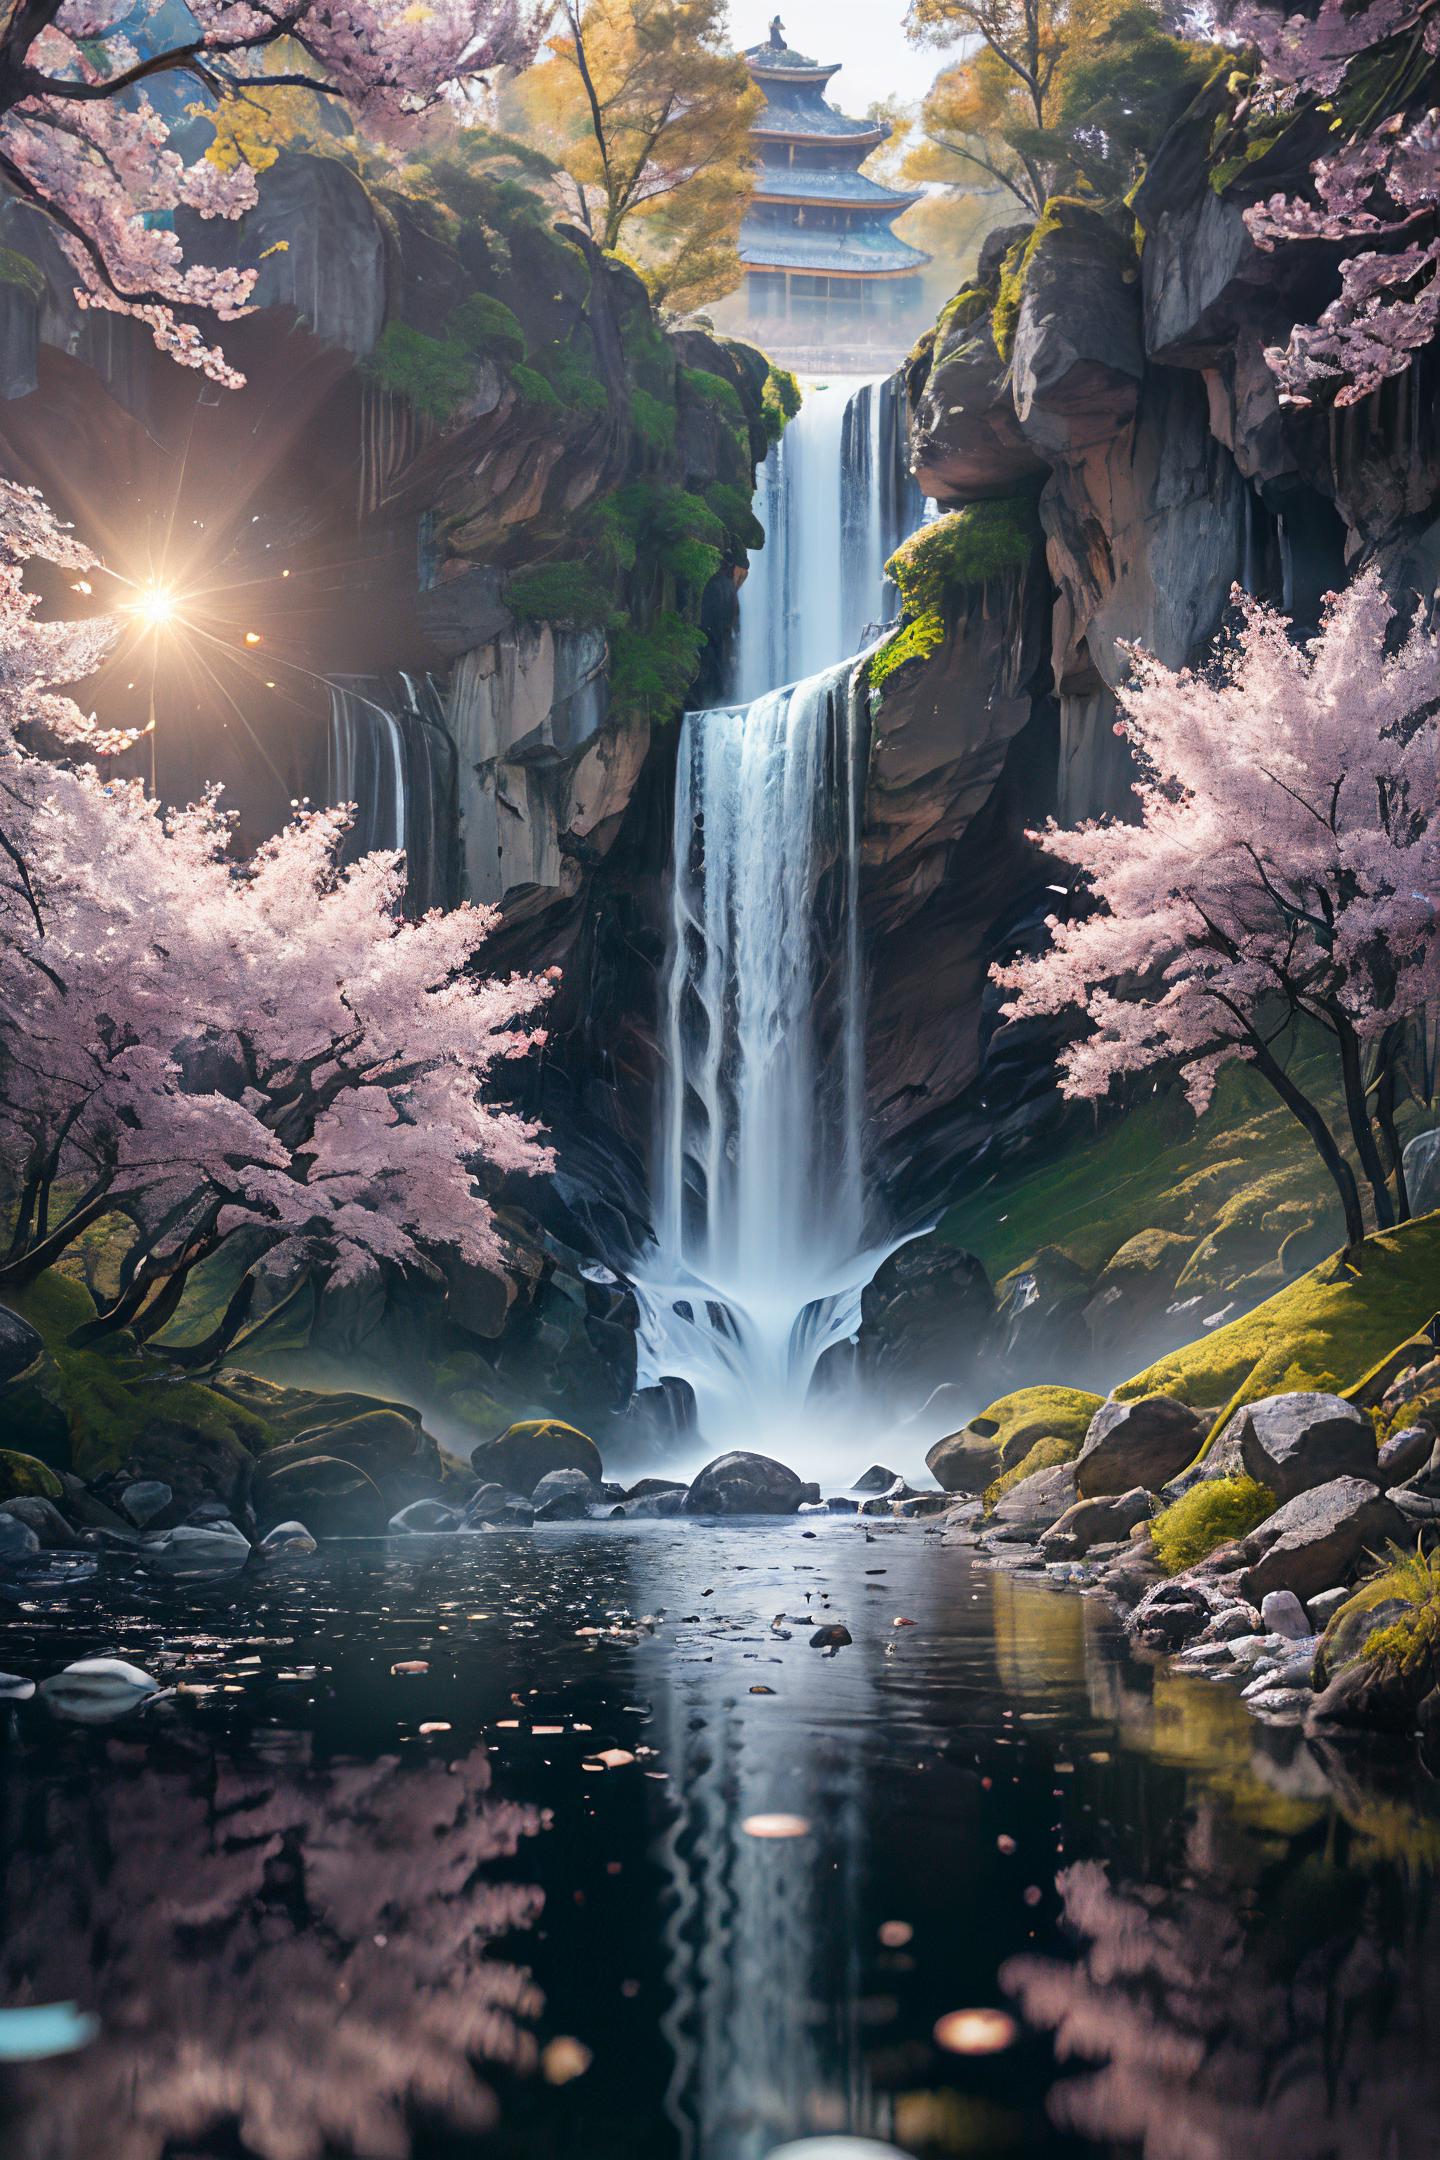 Waterfall with a rocky cliff and a forest of cherry blossoms.